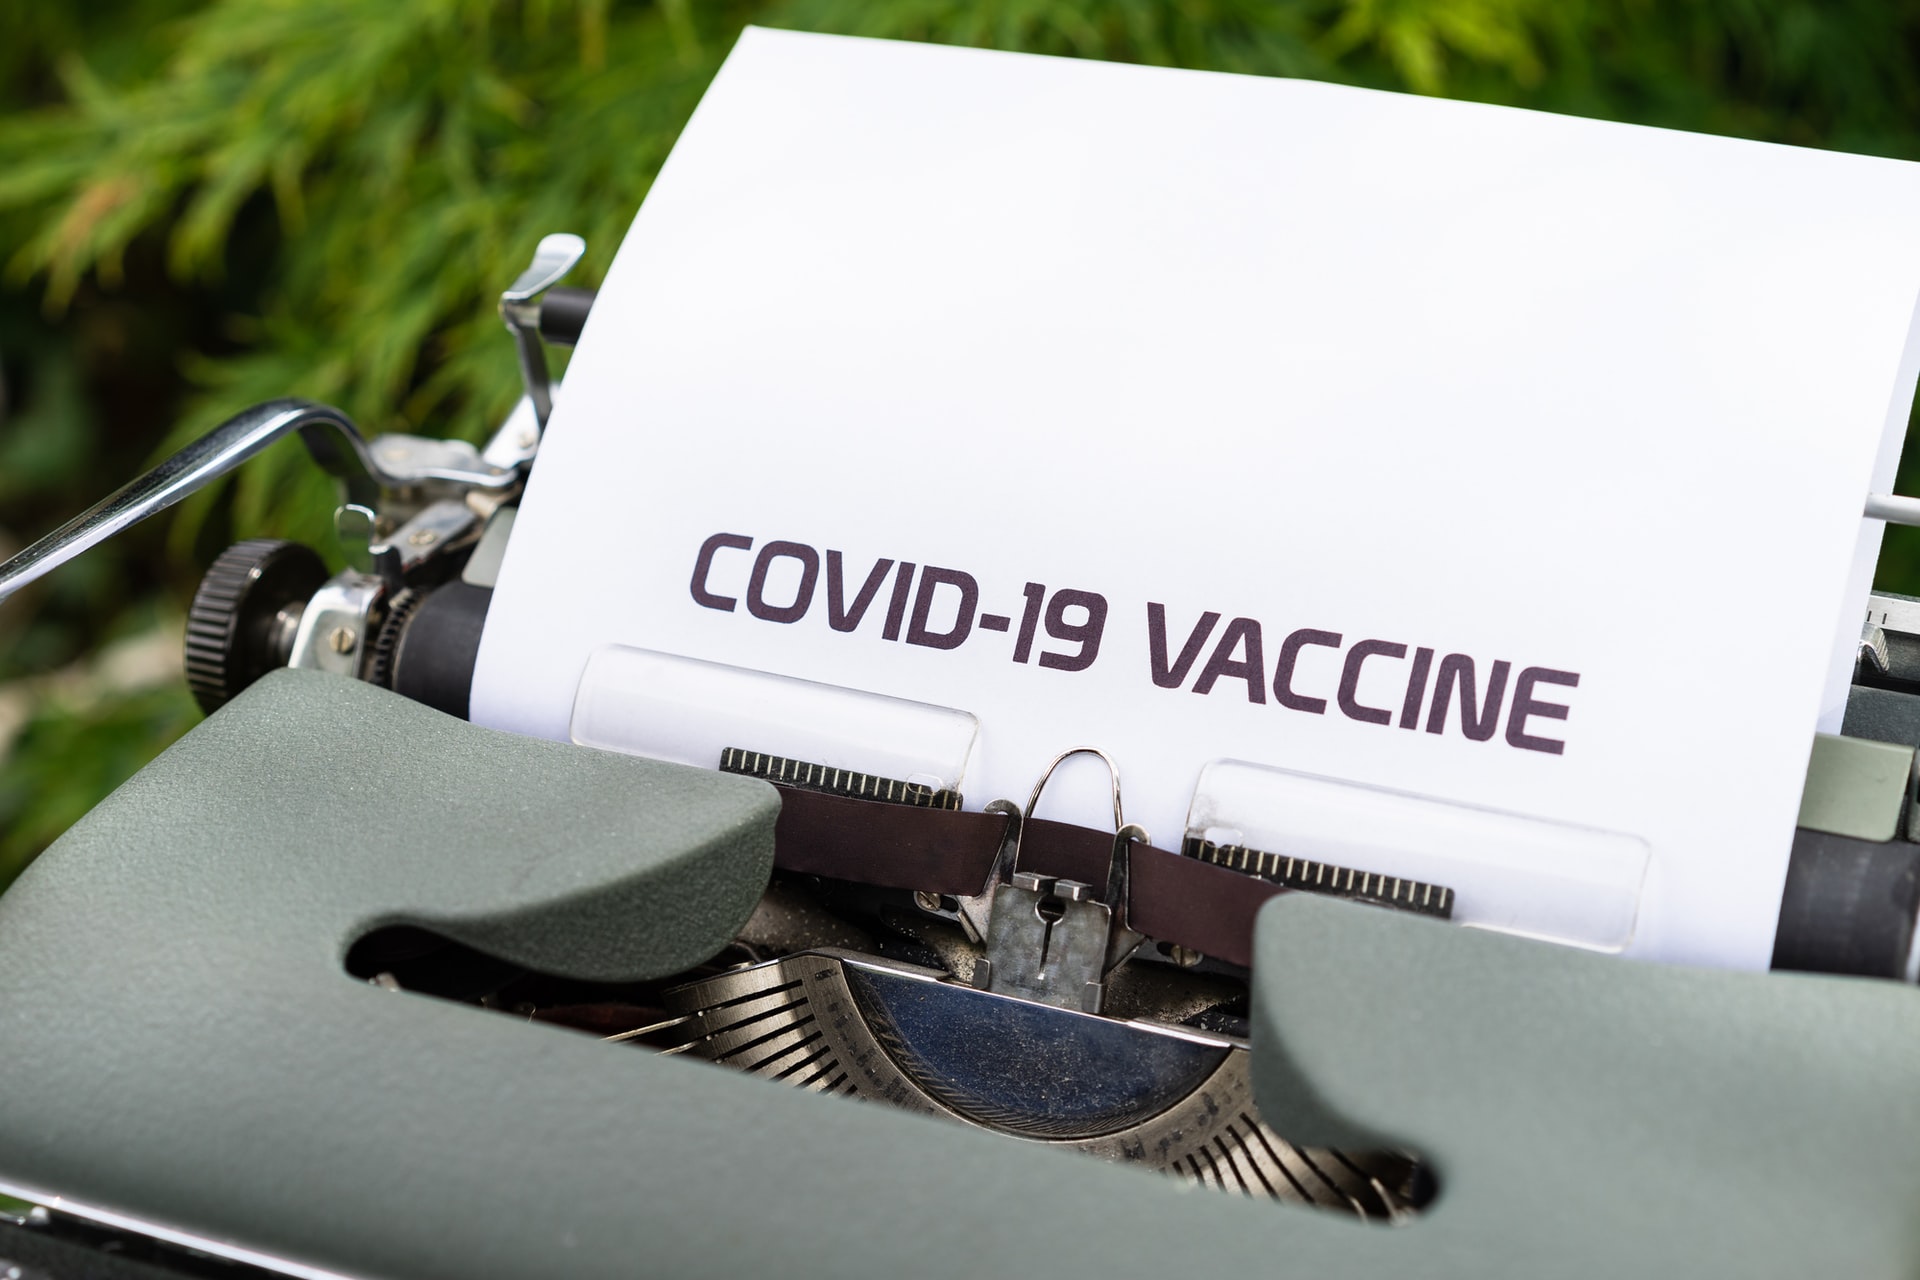 A typewriter with a paper that says "COVID-19 VACCINE"